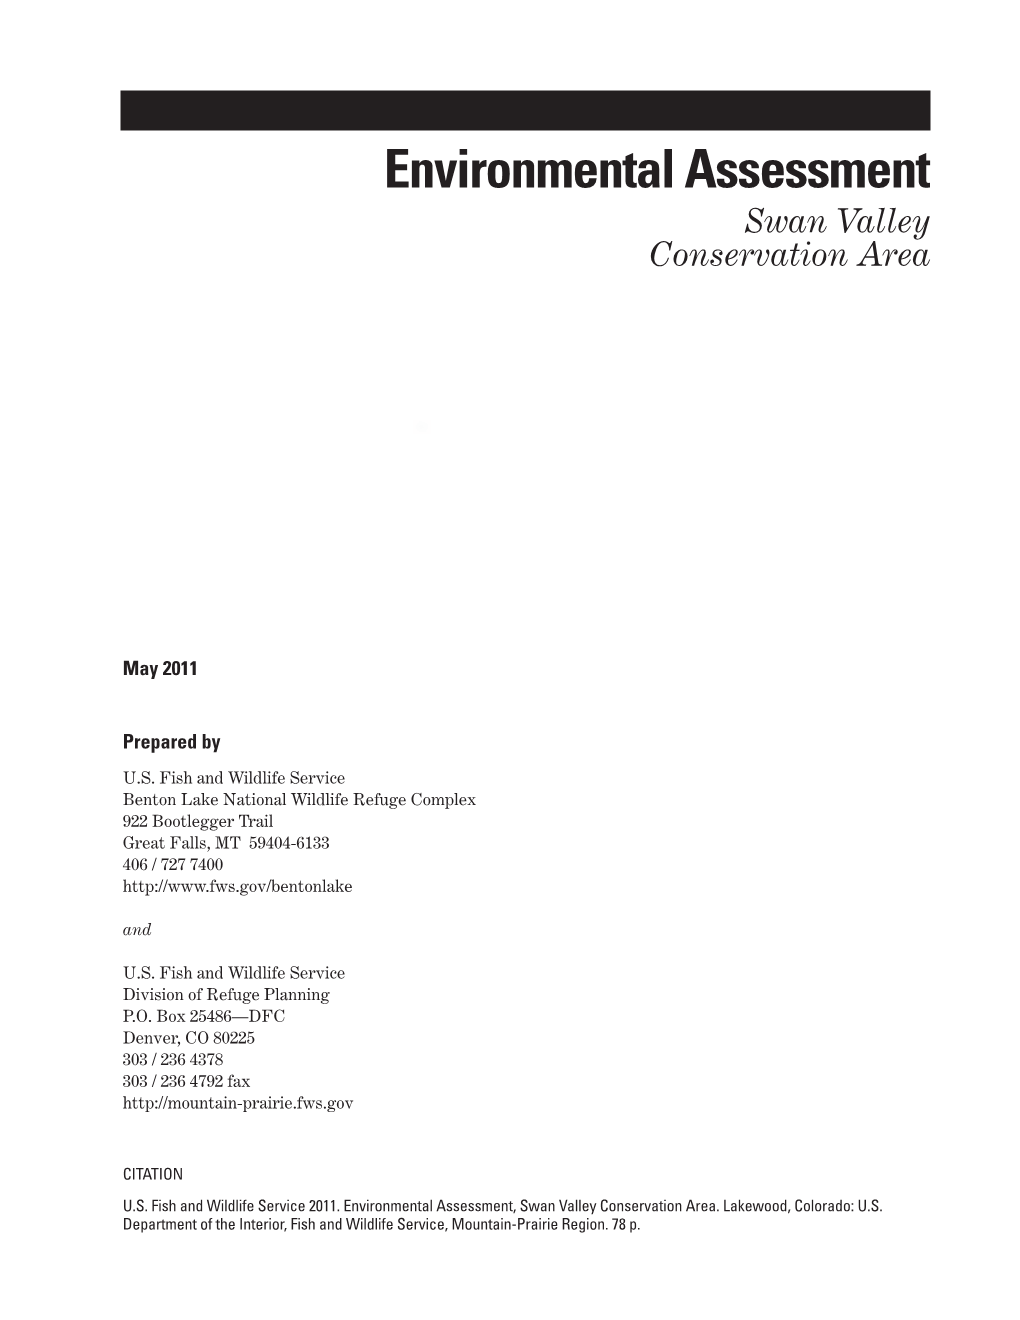 Swan Valley Conservation Area: Environmental Assessment